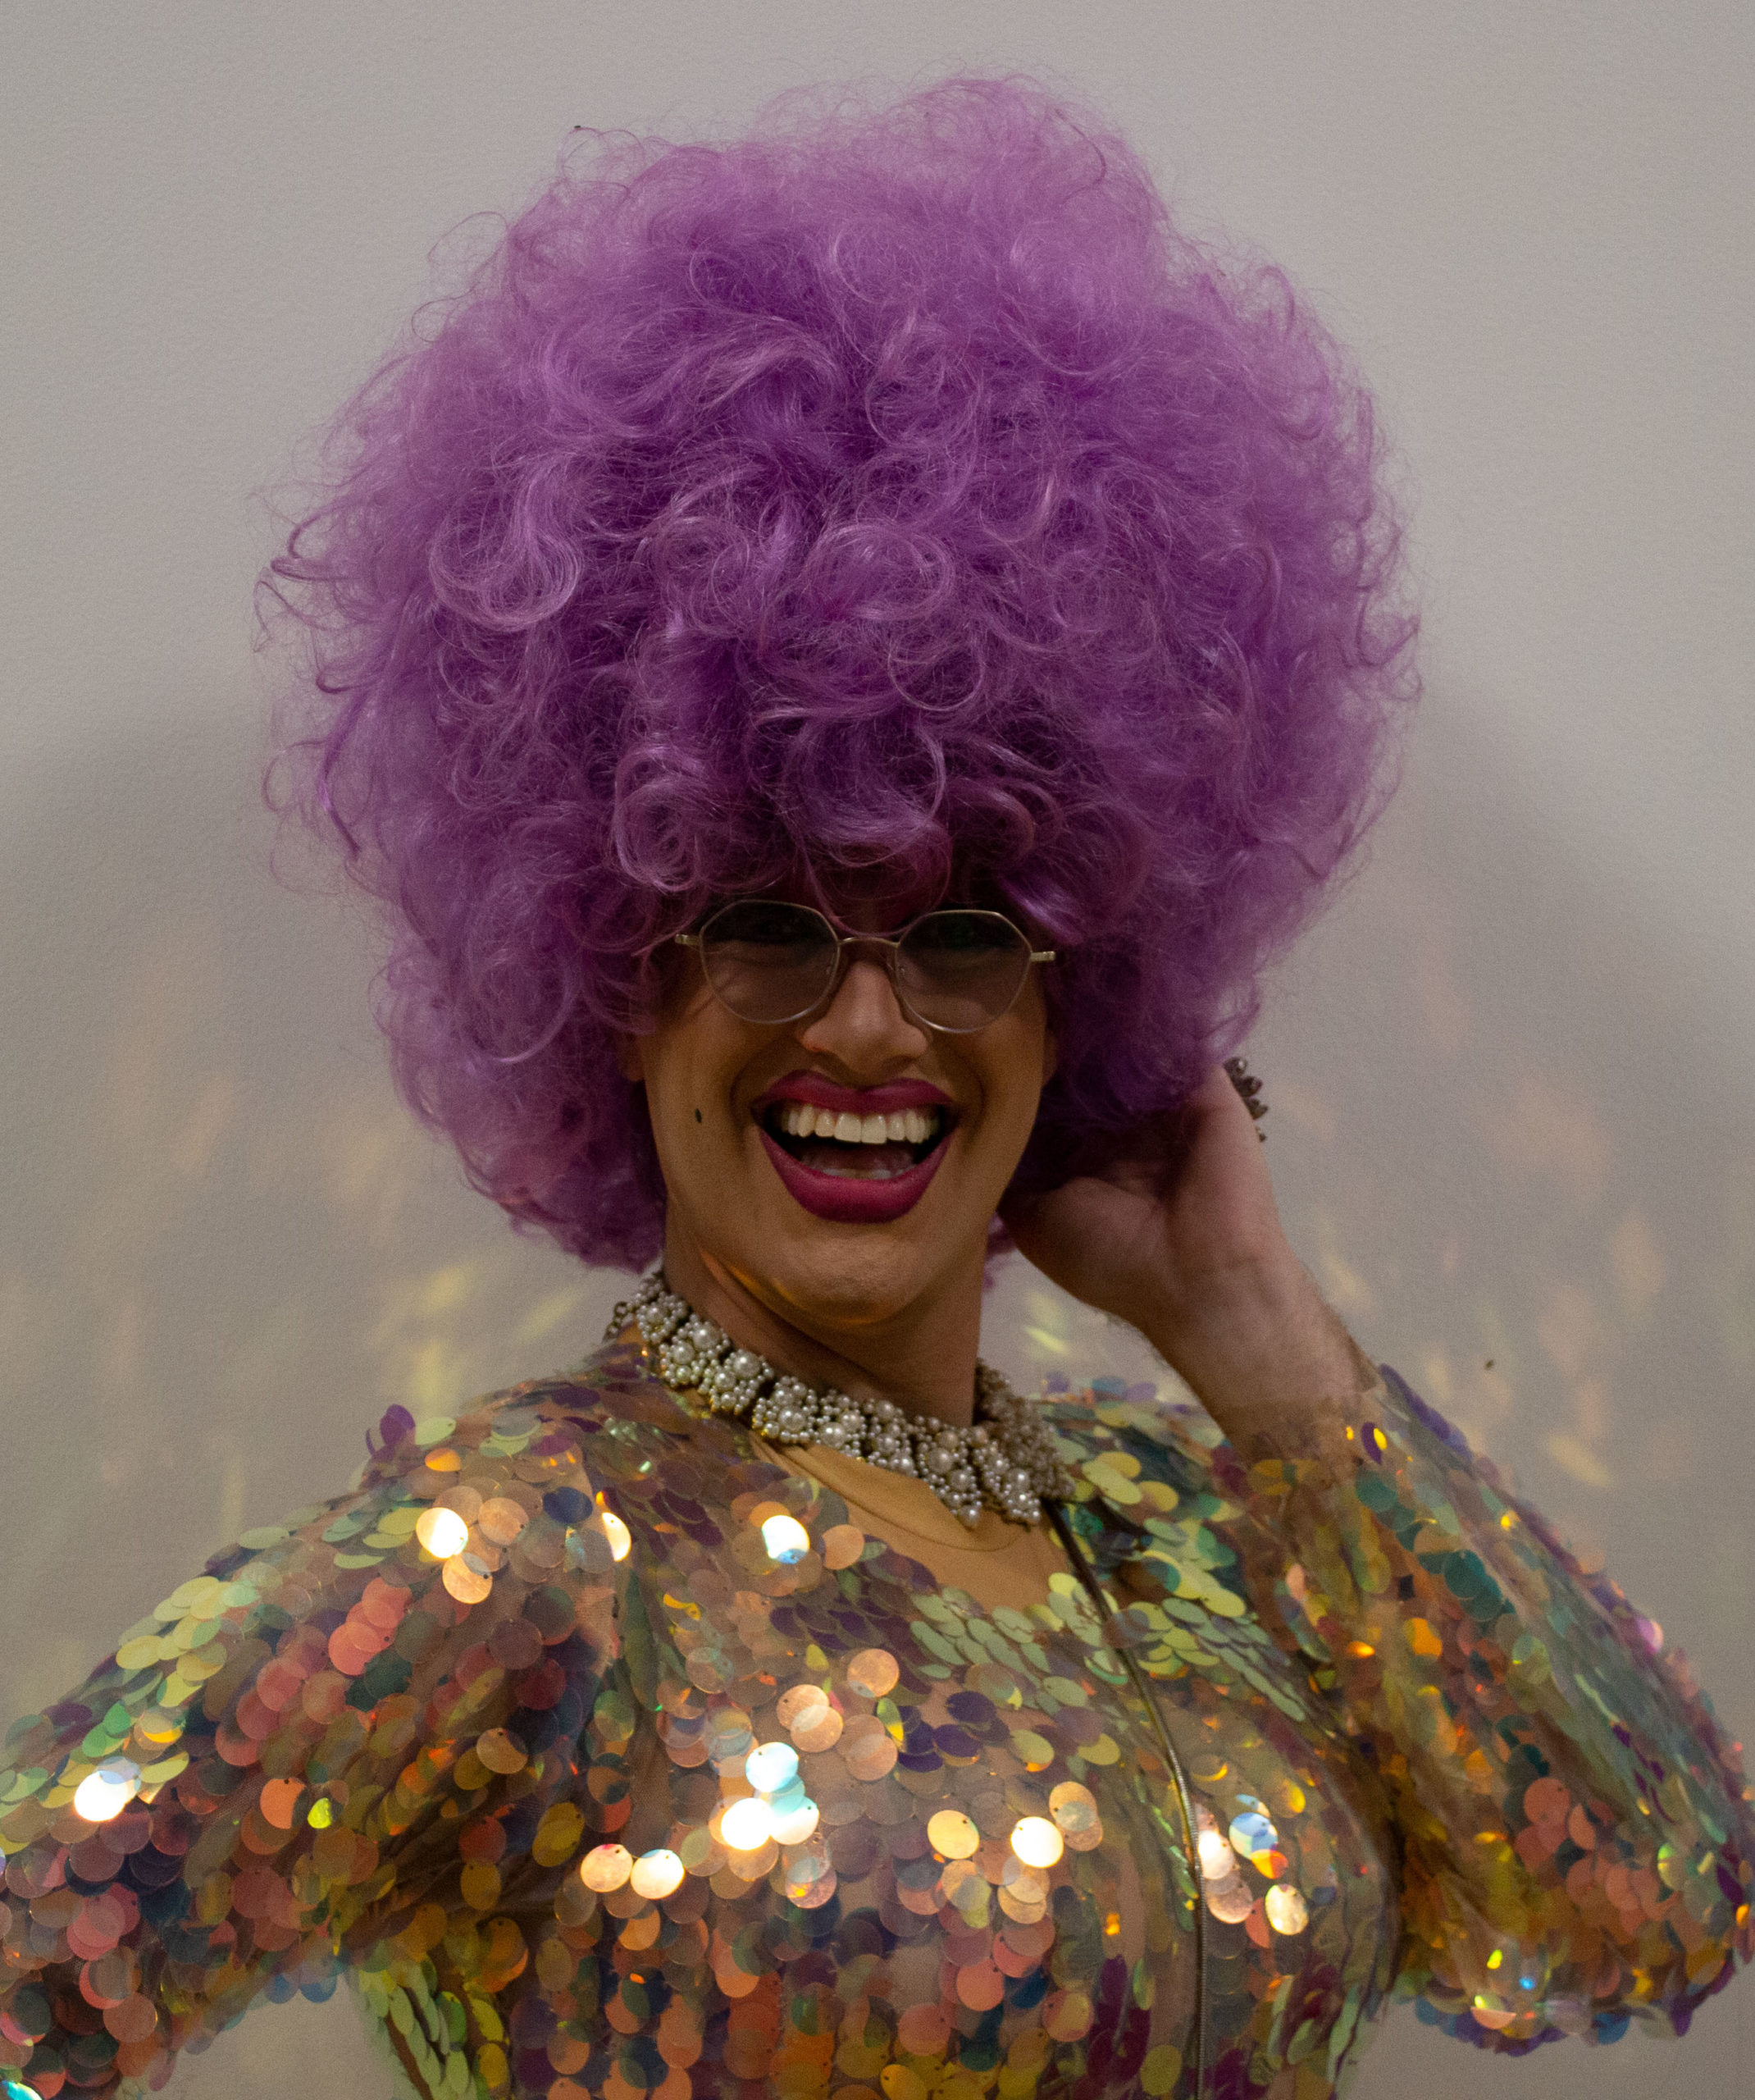 Pictured is Isaac Simmons in drag as Ms. Penny Cost. They are wearing a shiny dress with scales and a pink/purple wig.